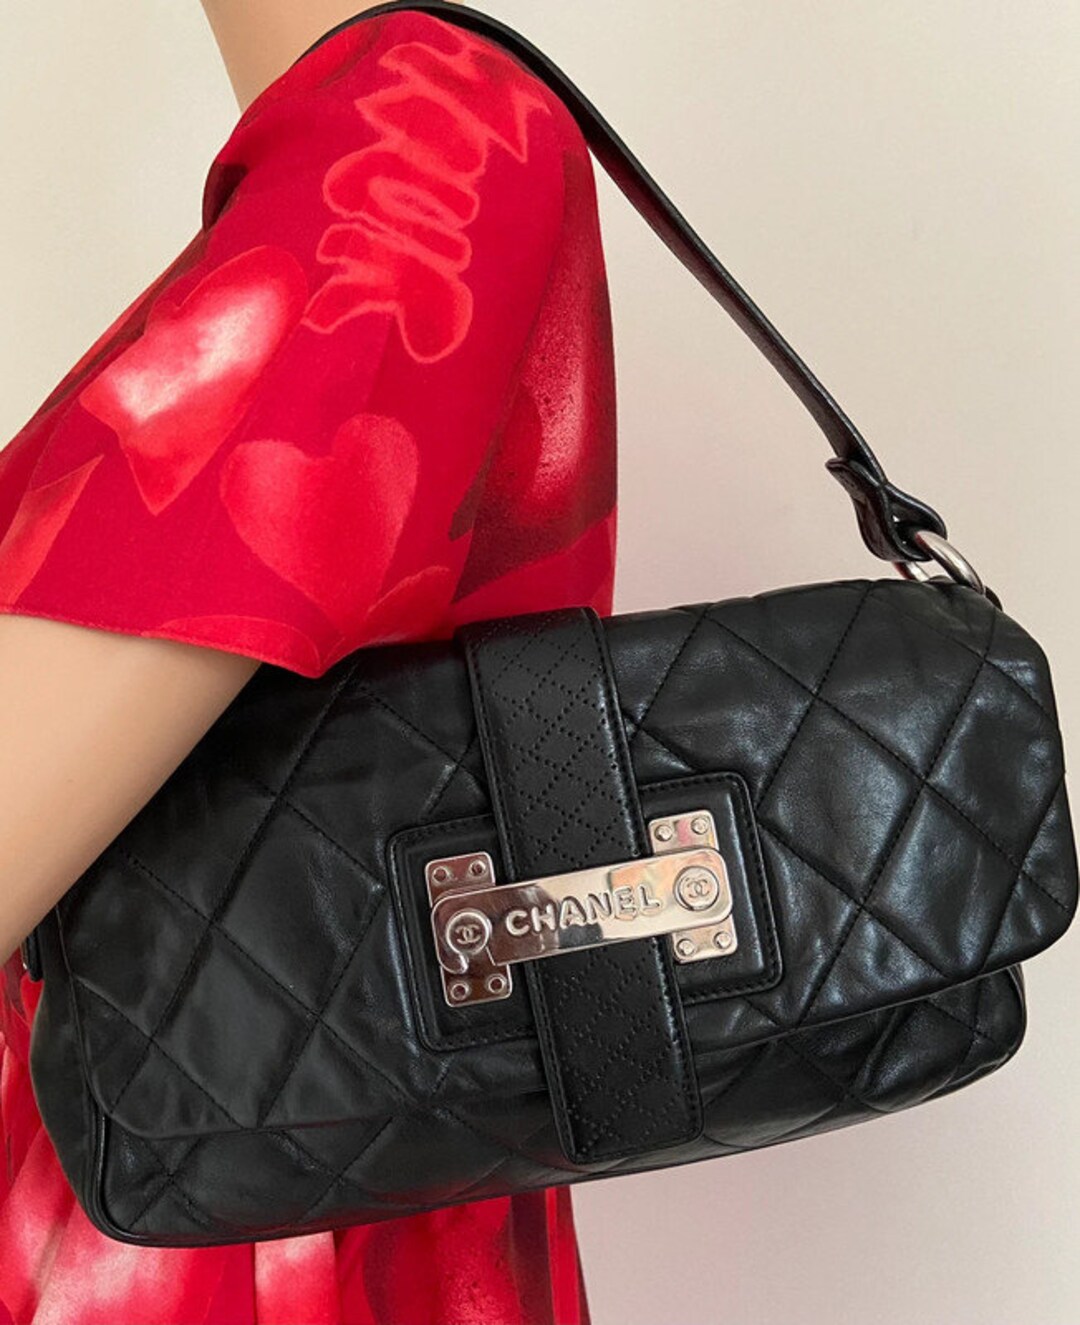 Chanel Baguette Handbag in Red Quilted Grained Leather